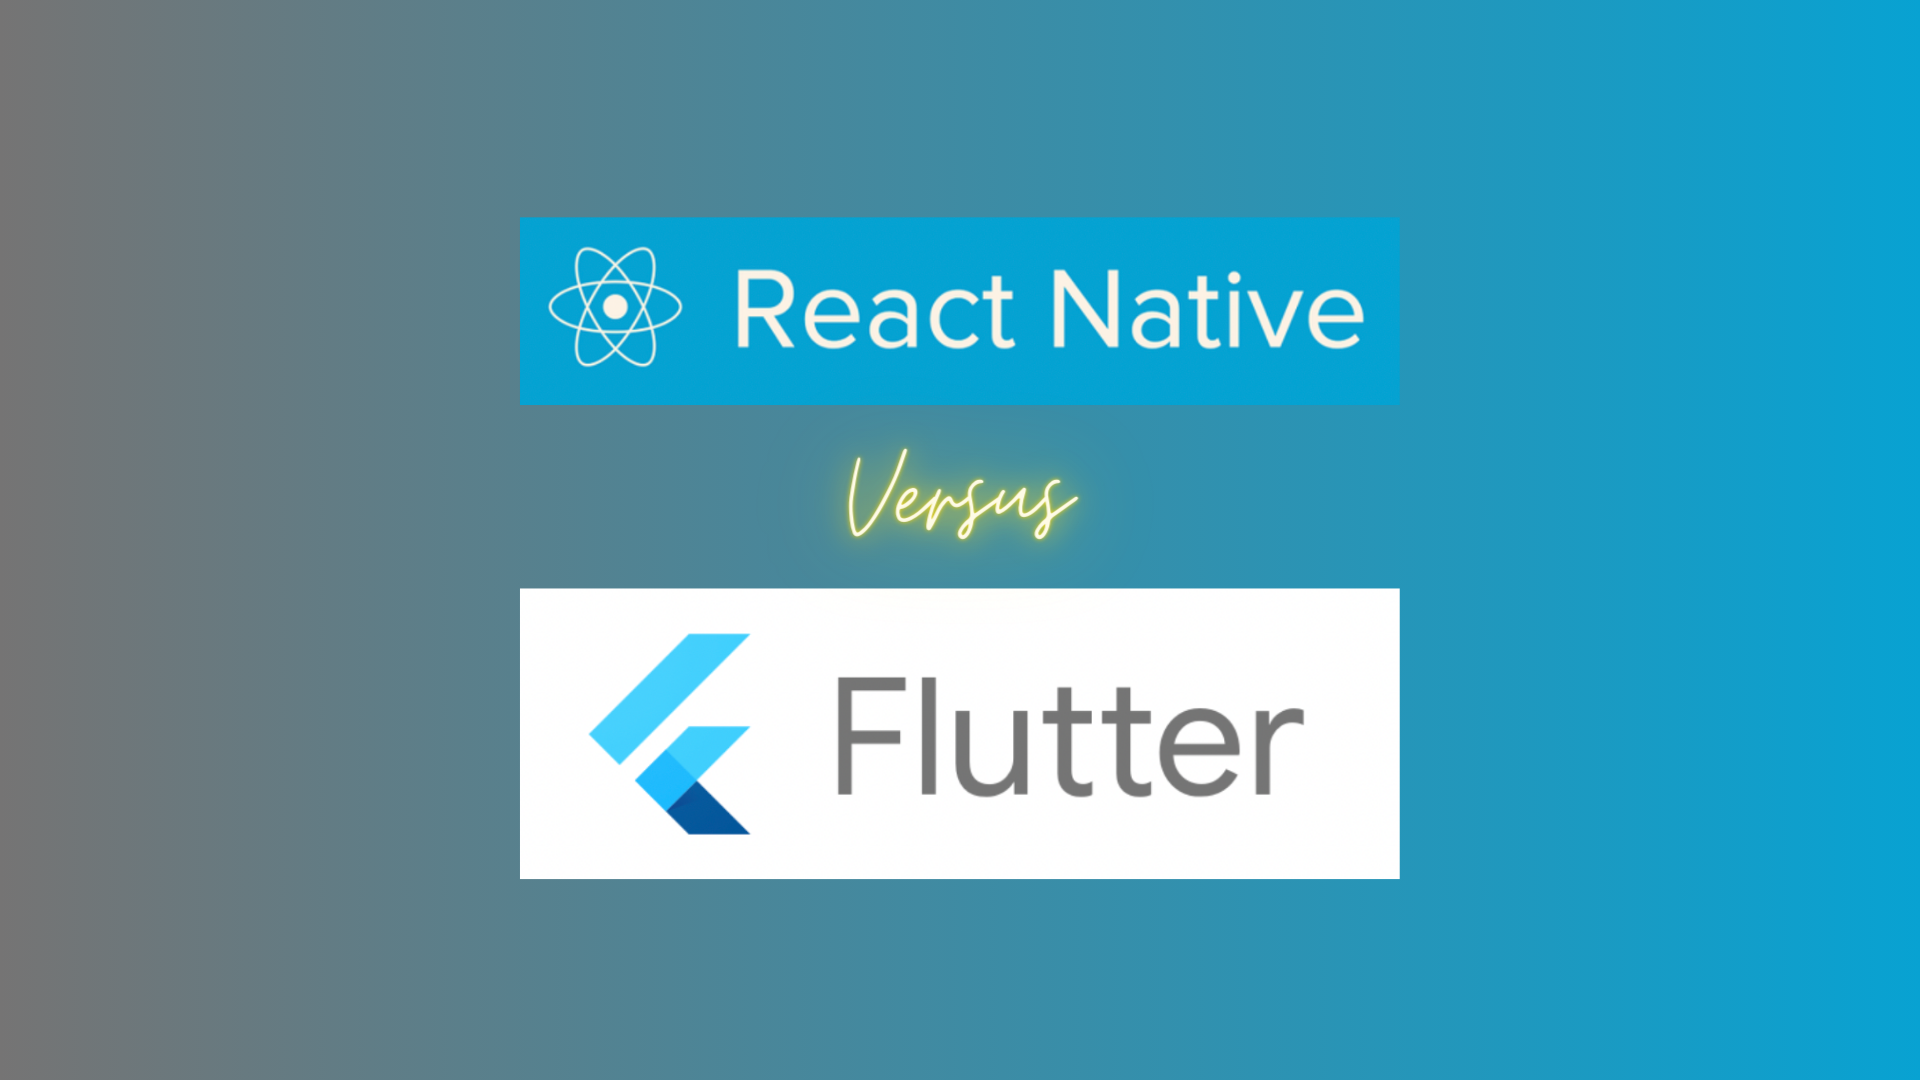 React Native vs Flutter with logos on a blended grey and light blue background. 